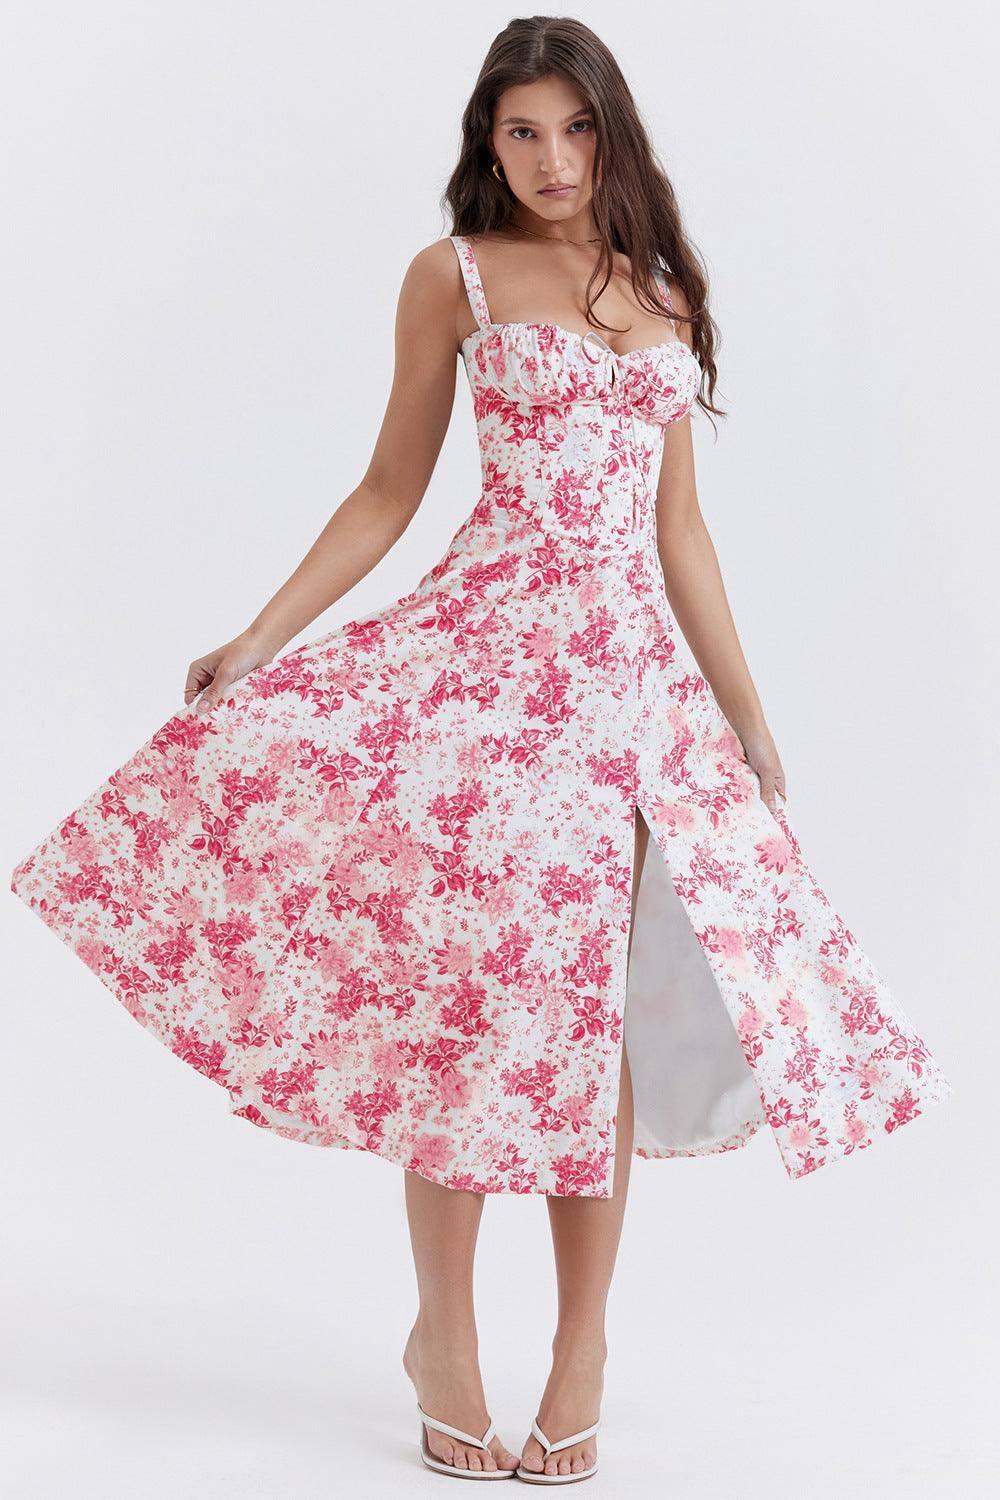 New Women's Floral Print Dress With Straps-White and red flower style-16